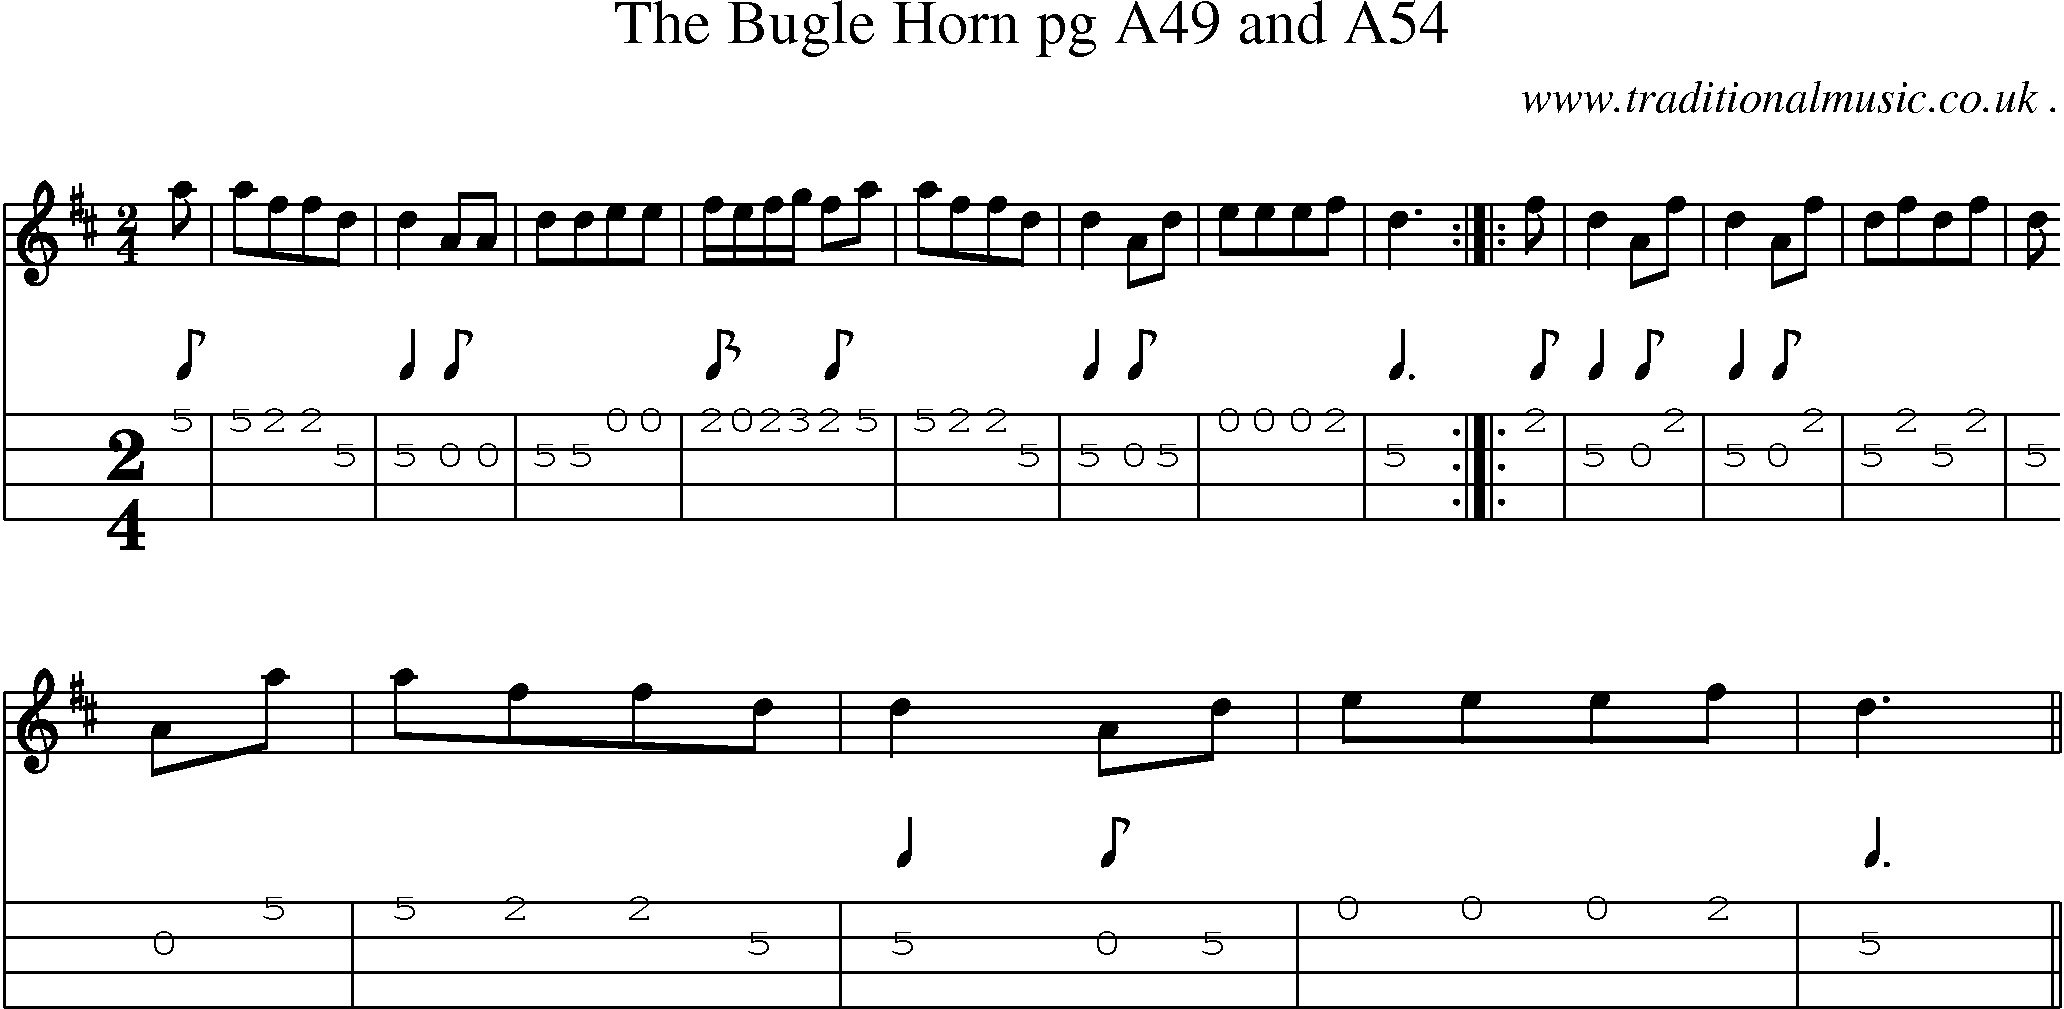 Sheet-Music and Mandolin Tabs for The Bugle Horn Pg A49 And A54